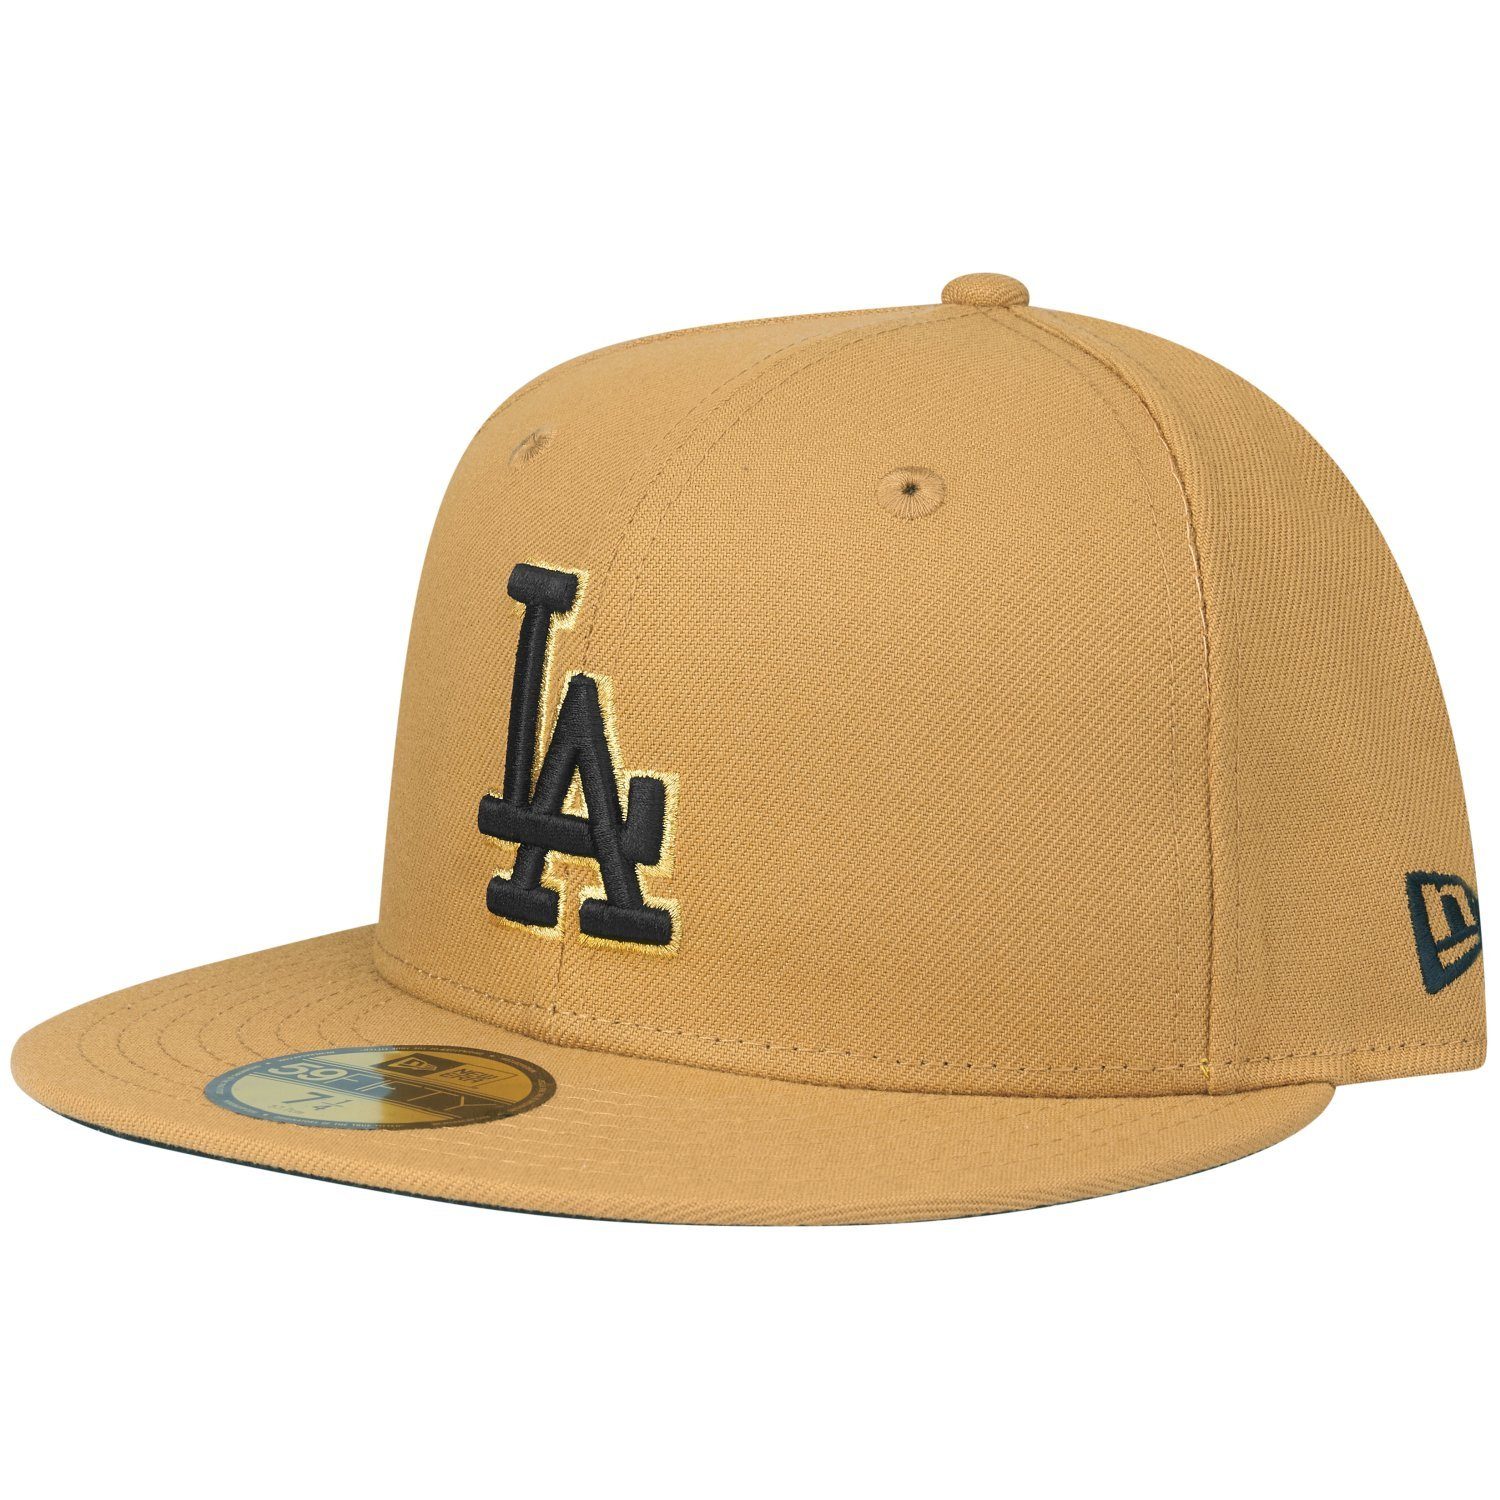 New Era Fitted Cap 59Fifty Los Angeles Dodgers panama